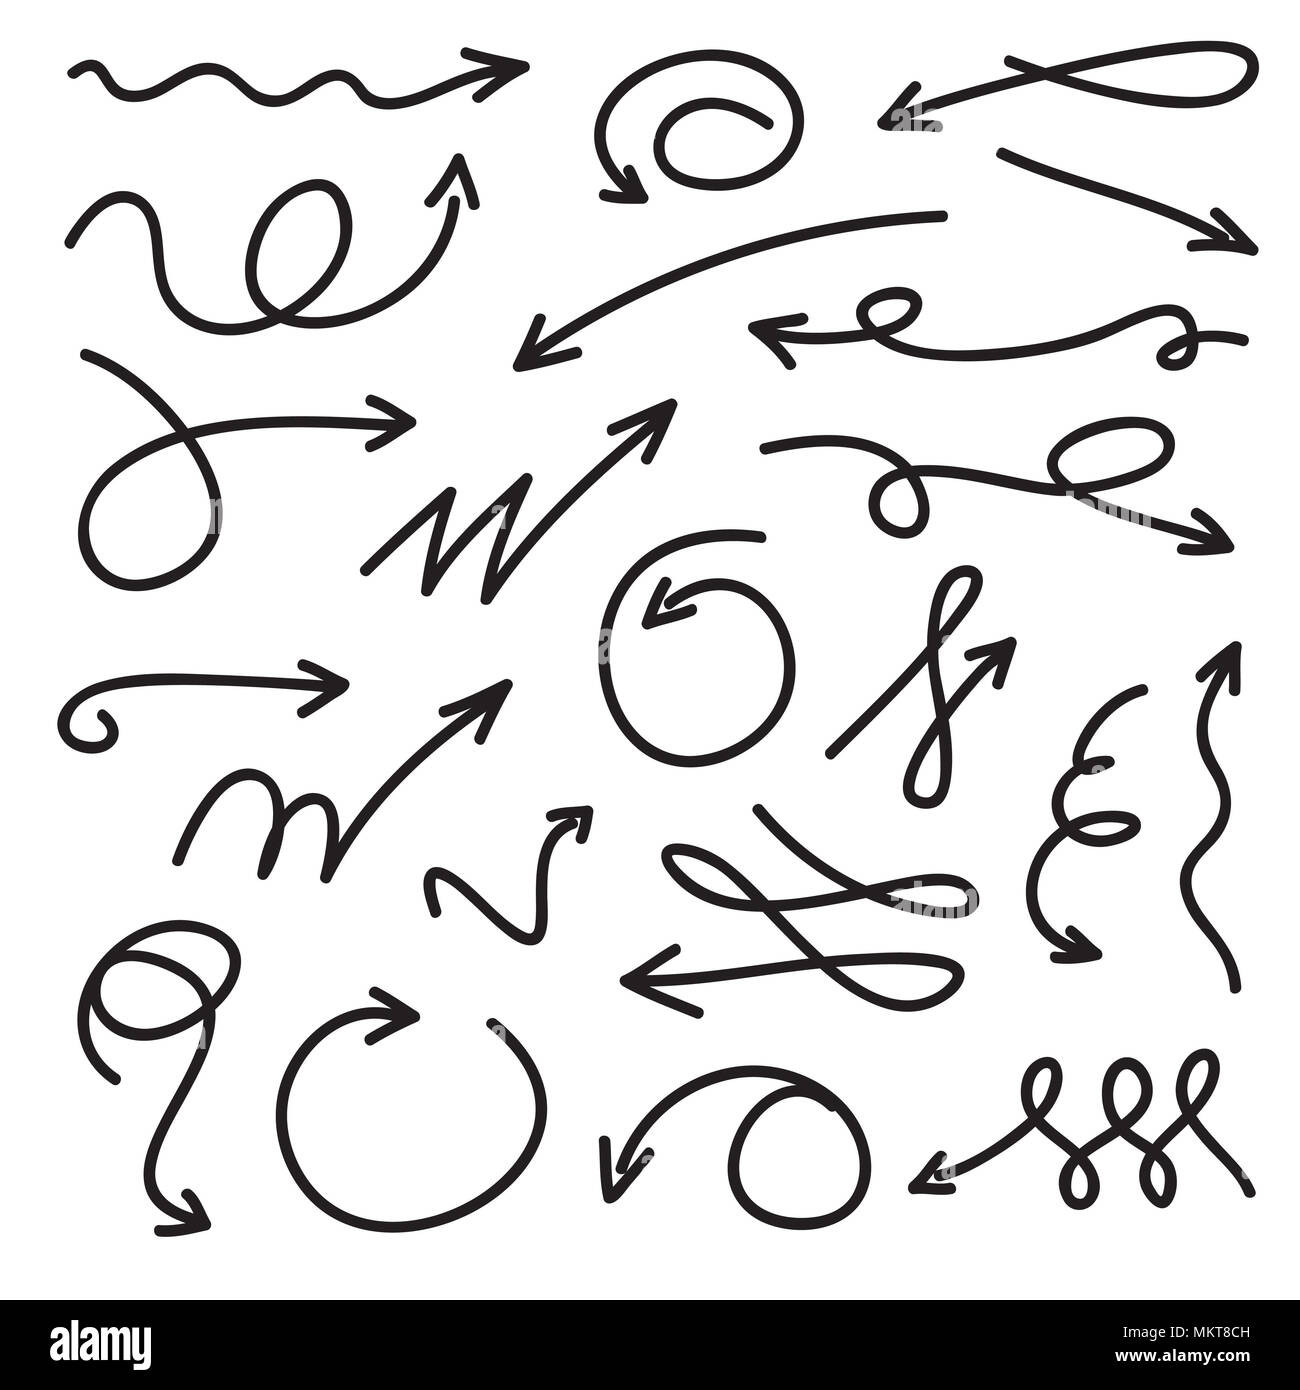 Set black arrows drawing by pen. Vector illustration. Collection of Icons. Stock Photo